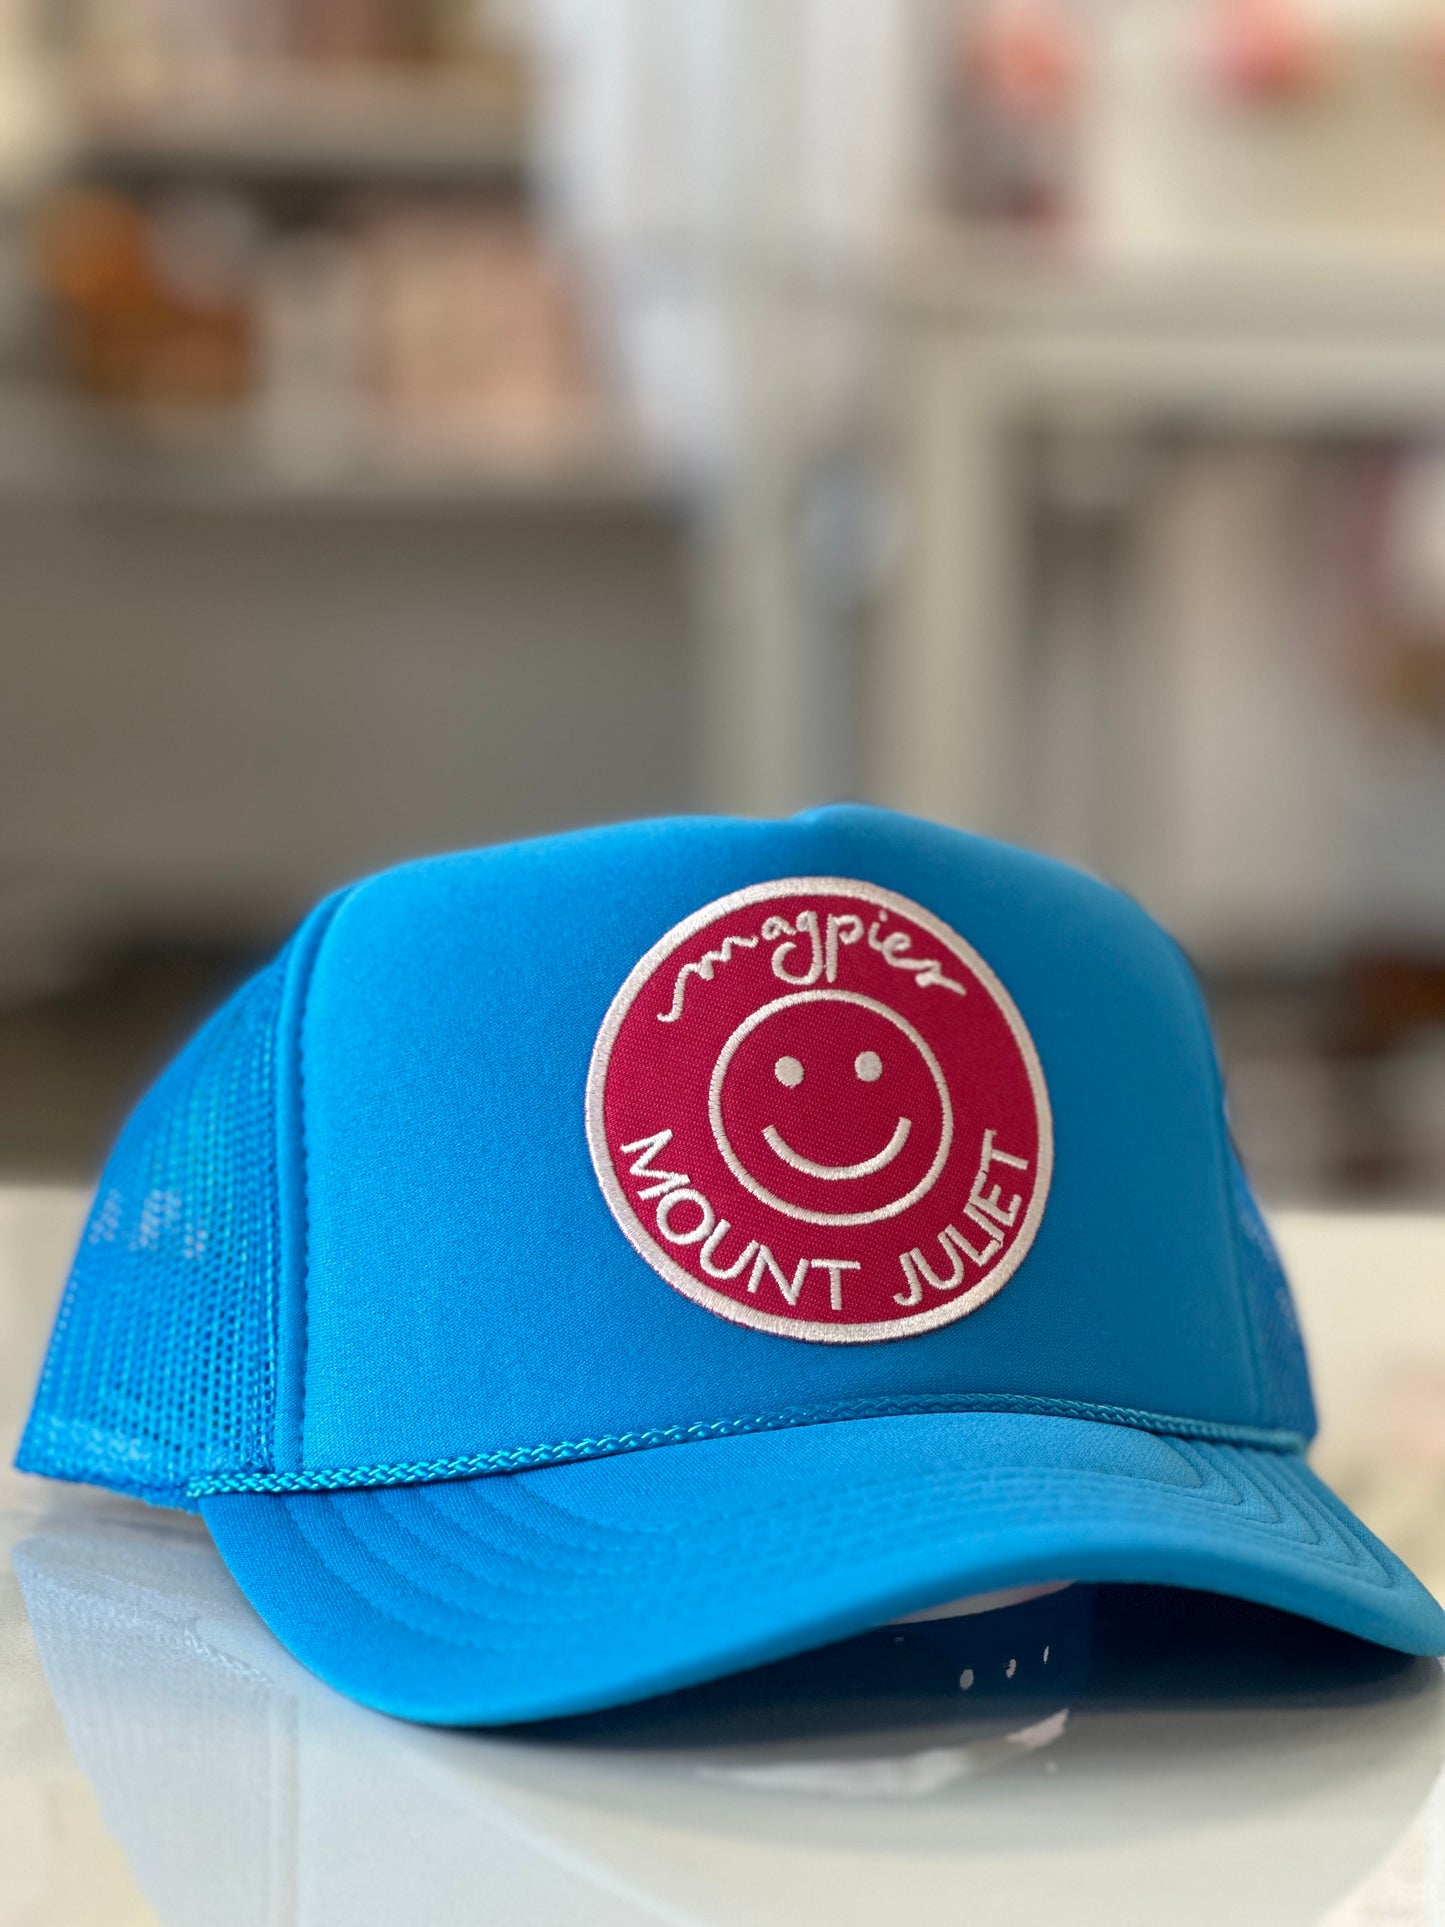 Magpies Mt Juliet Patch Trucker Hat | Neon Blue and Pink